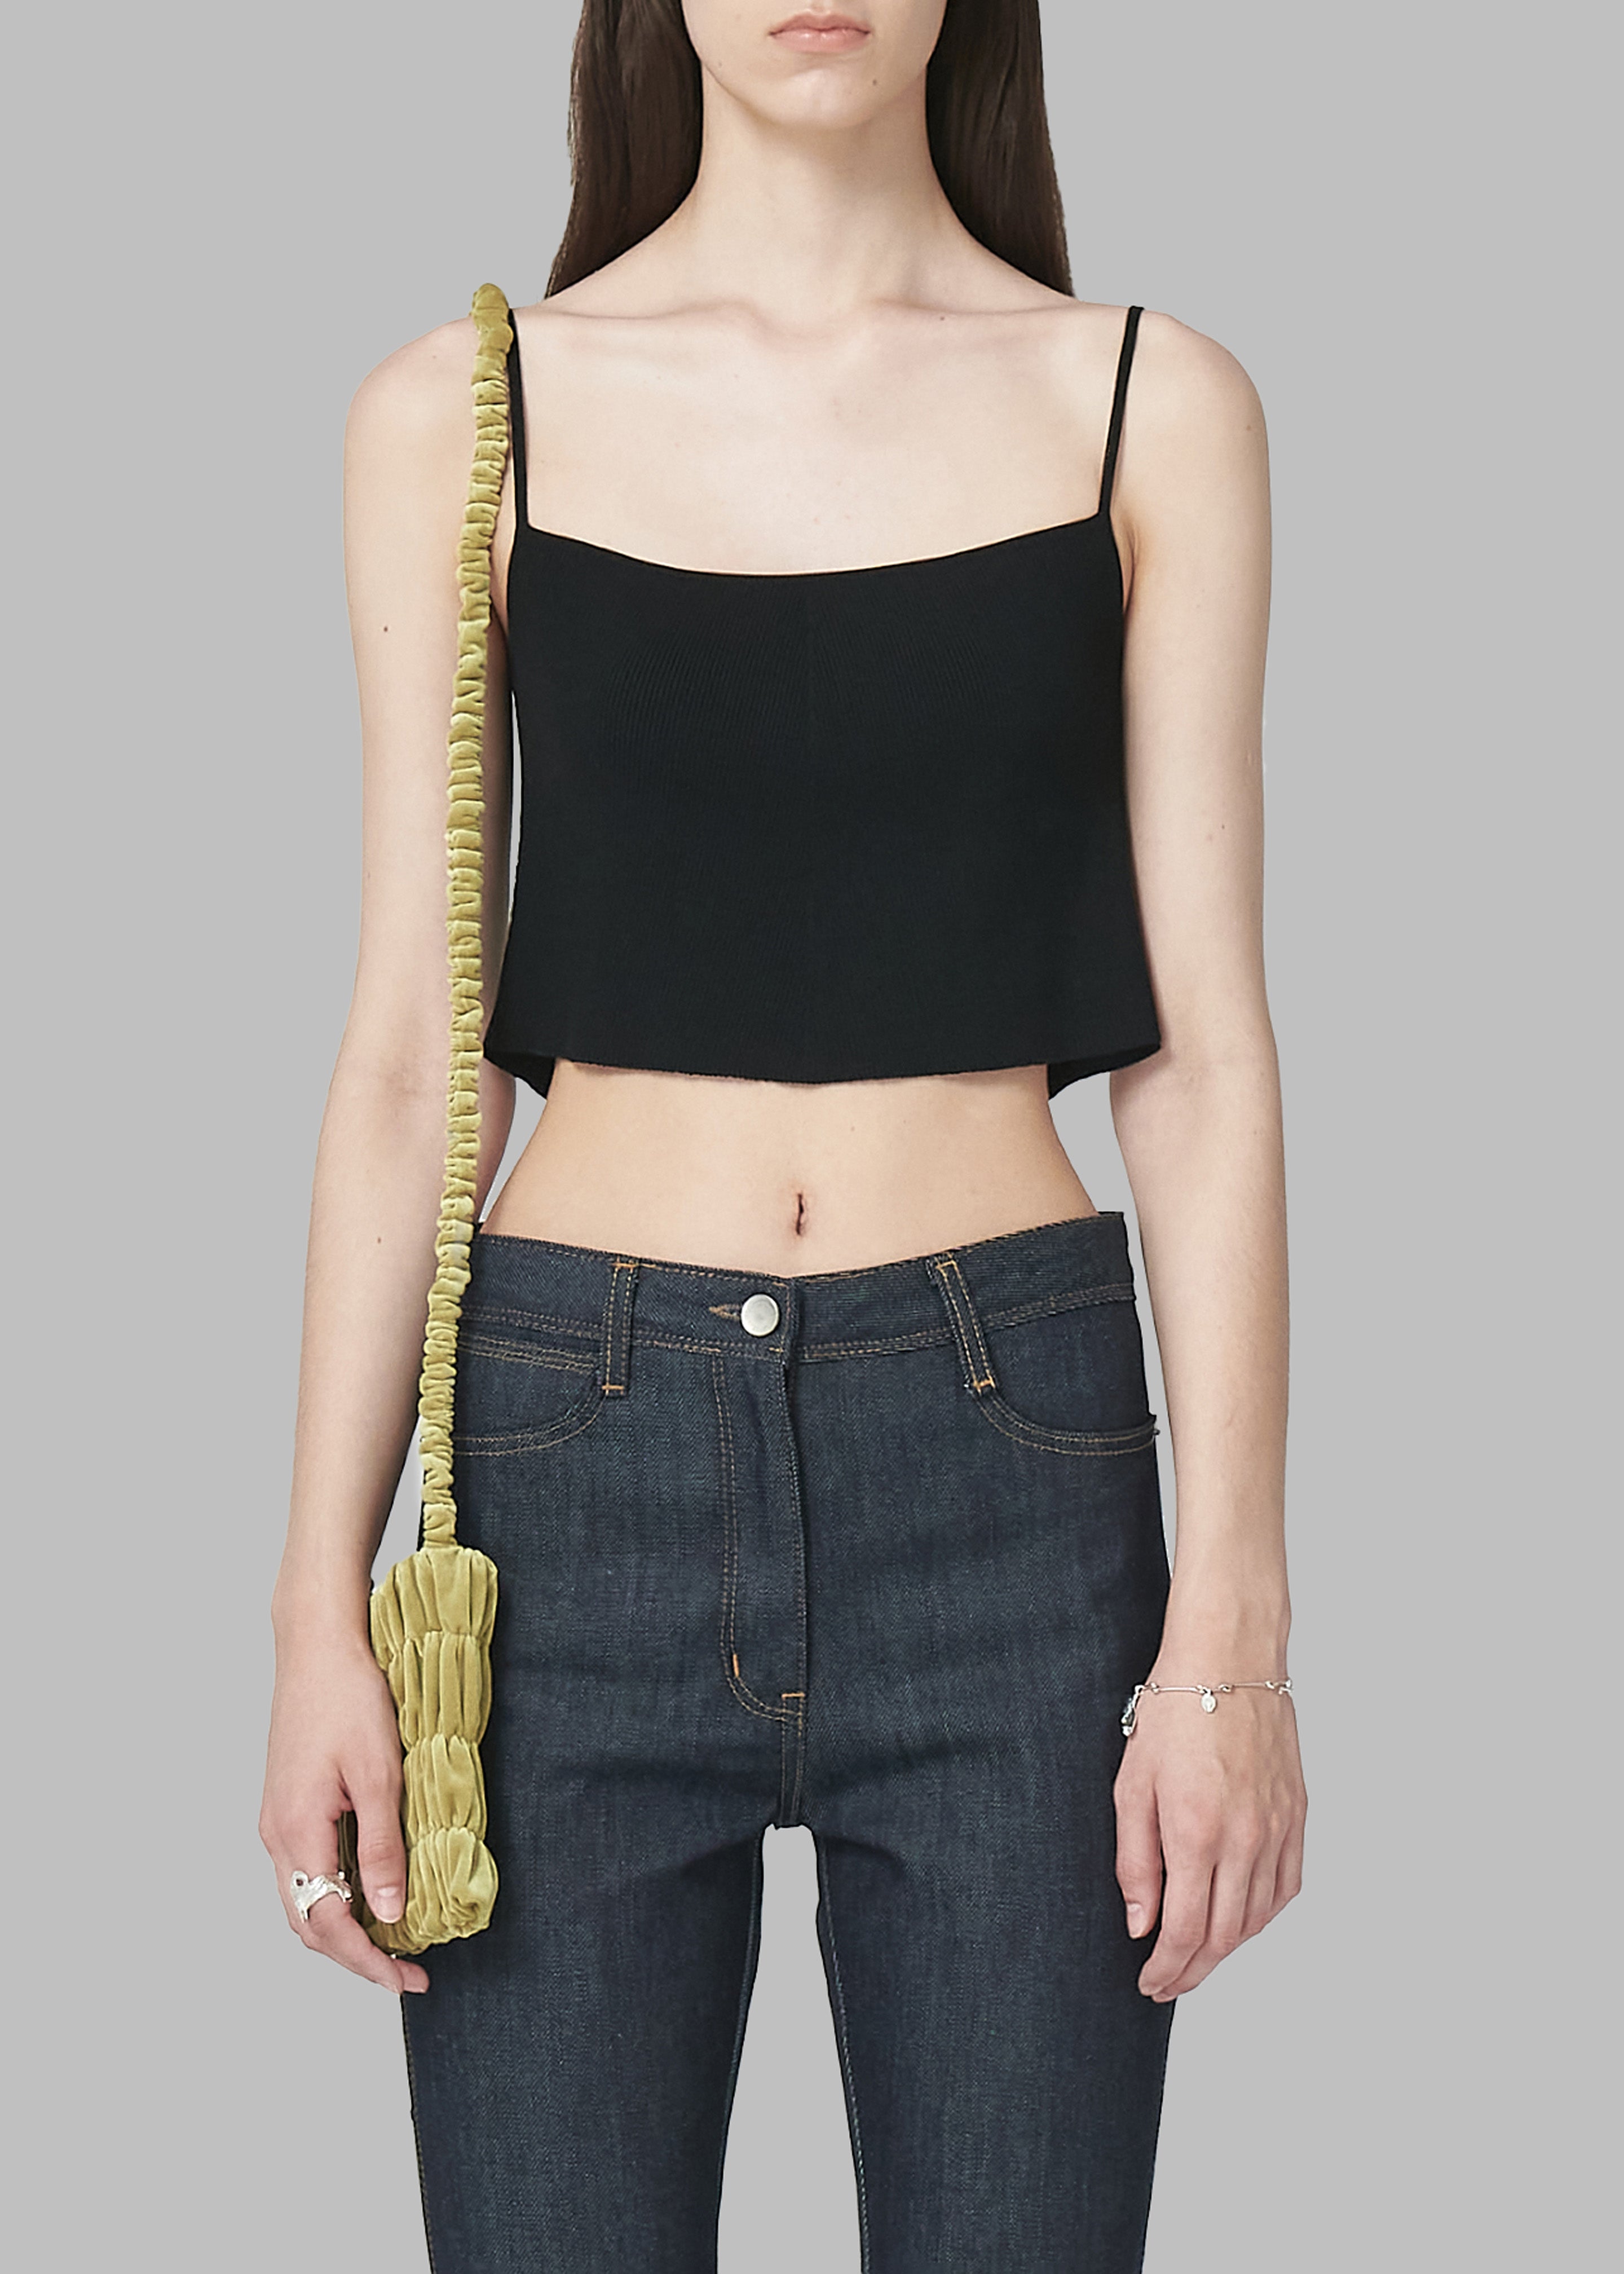 Low Classic Knitted Sleeveless Crop Top - Black - 3